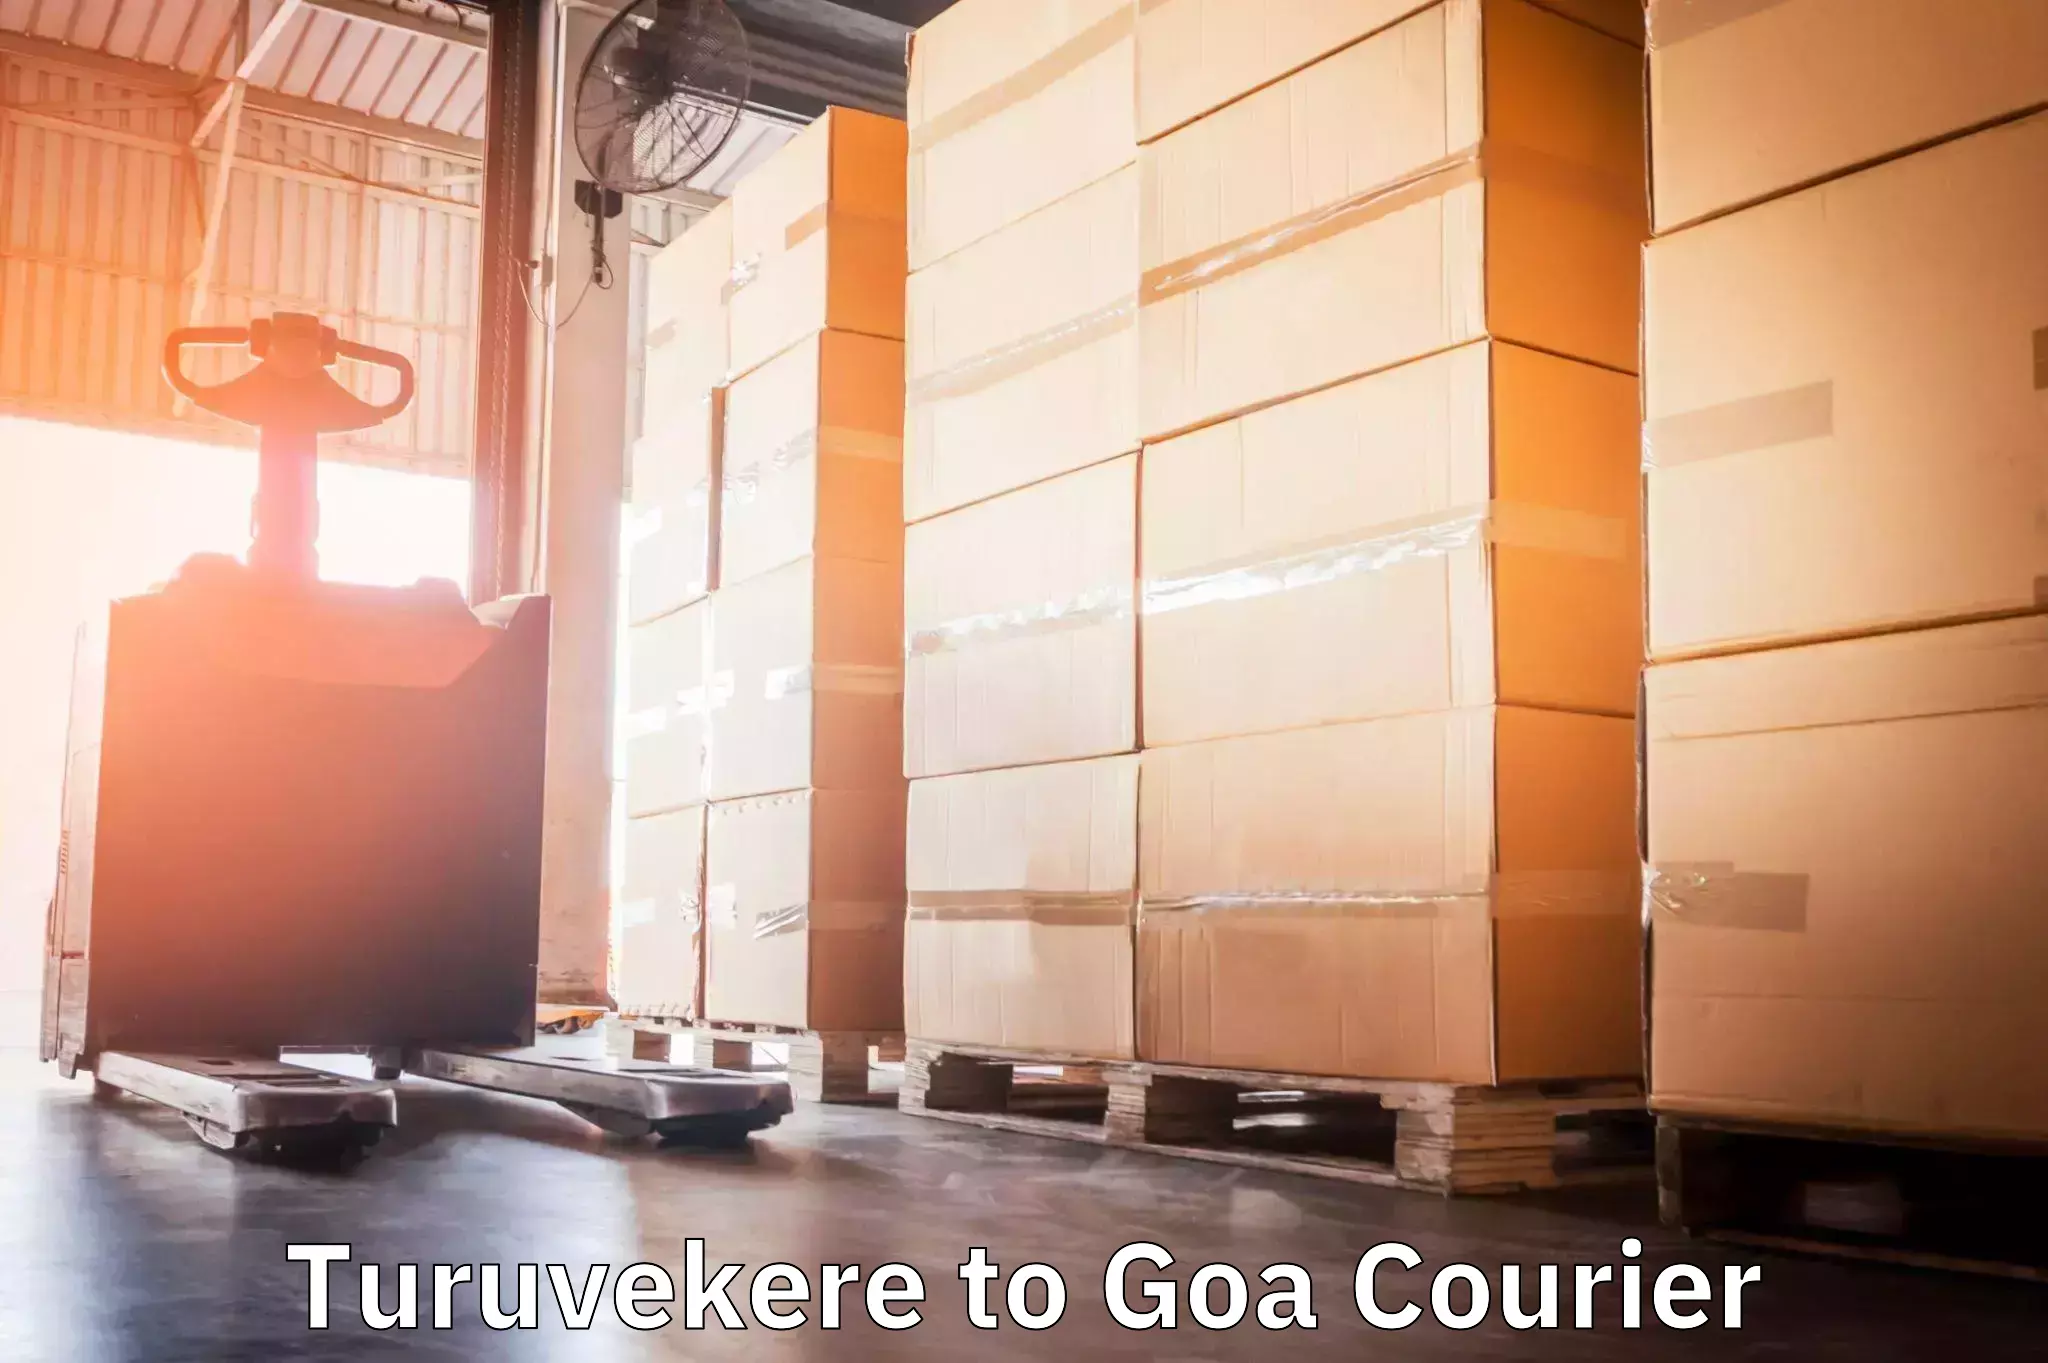 Package delivery network Turuvekere to Goa